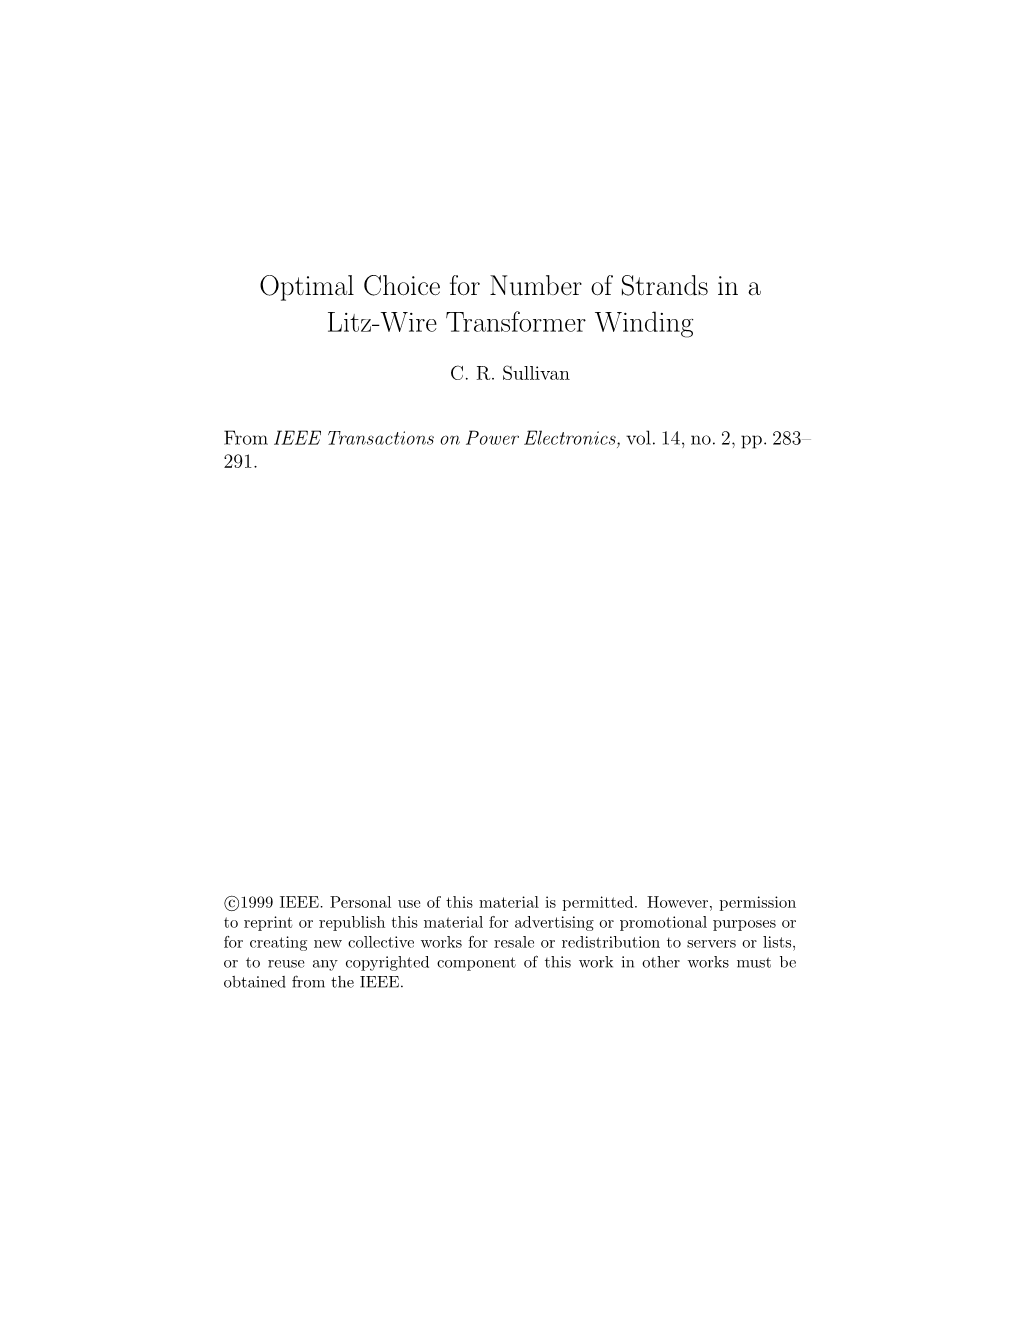 Optimal Choice for Number of Strands in a Litz-Wire Transformer Winding